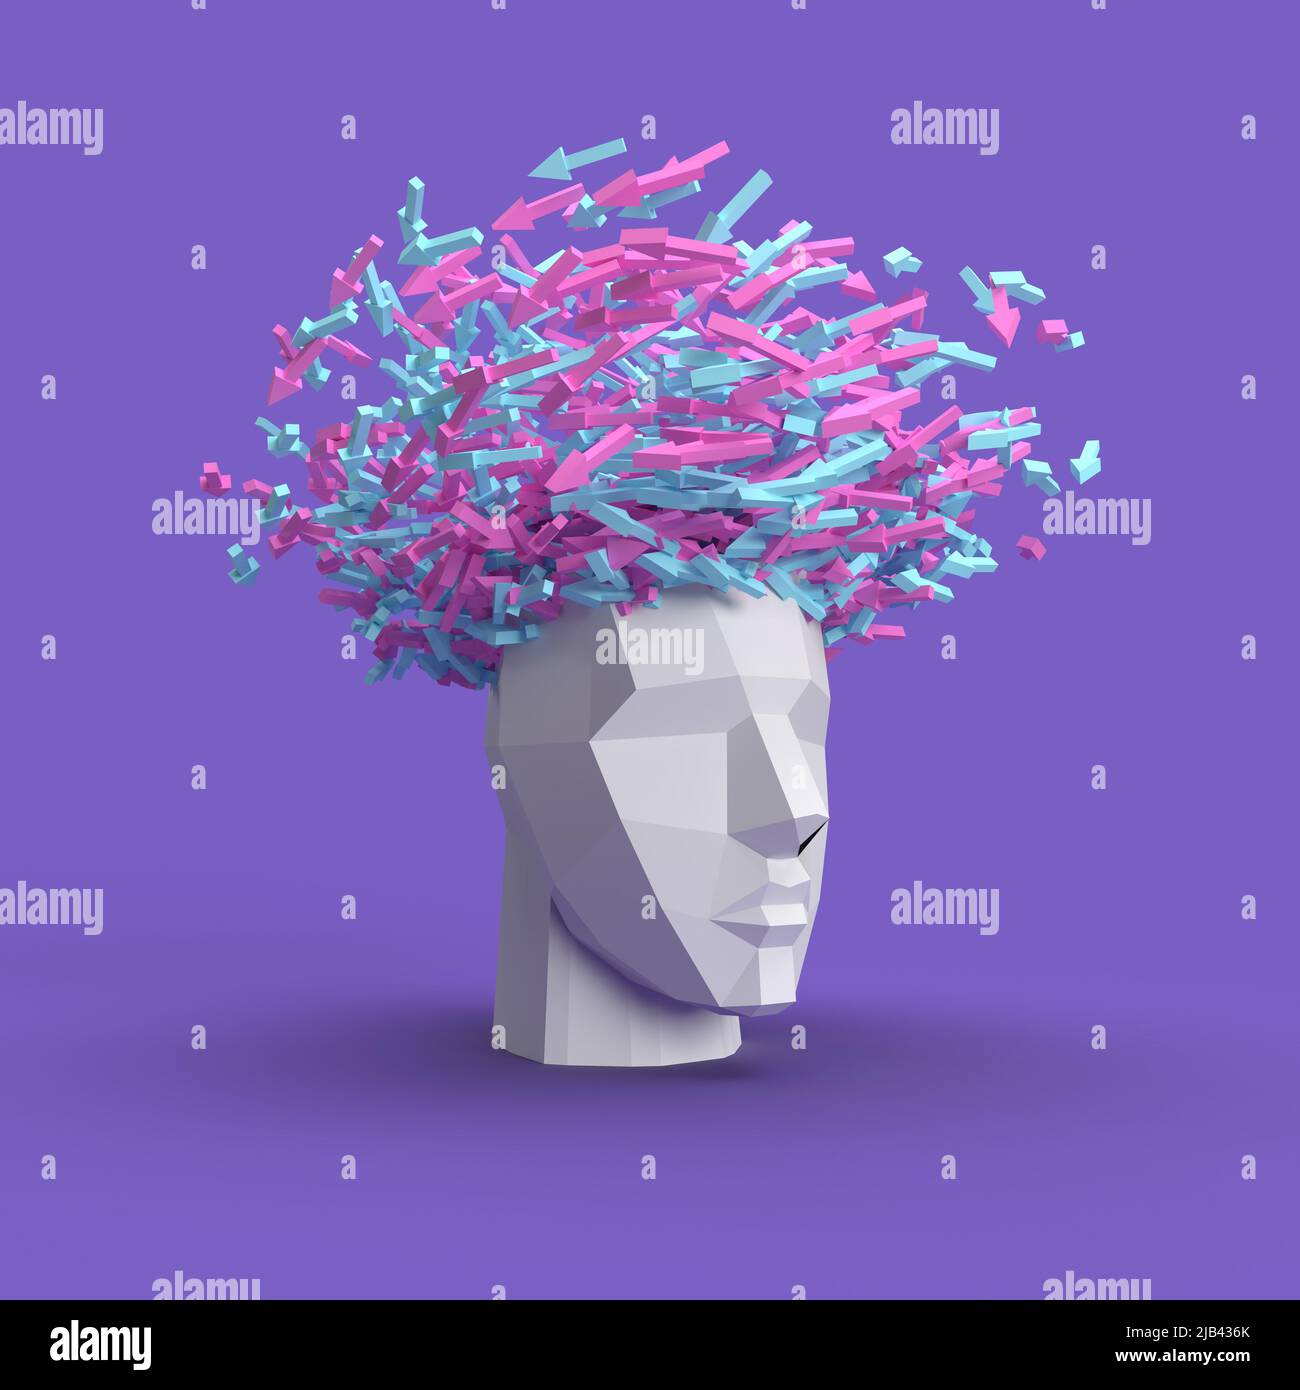 overwhelmed  by swarm of thoughts and ideas - arrows flying around head 3d illustration Stock Photo